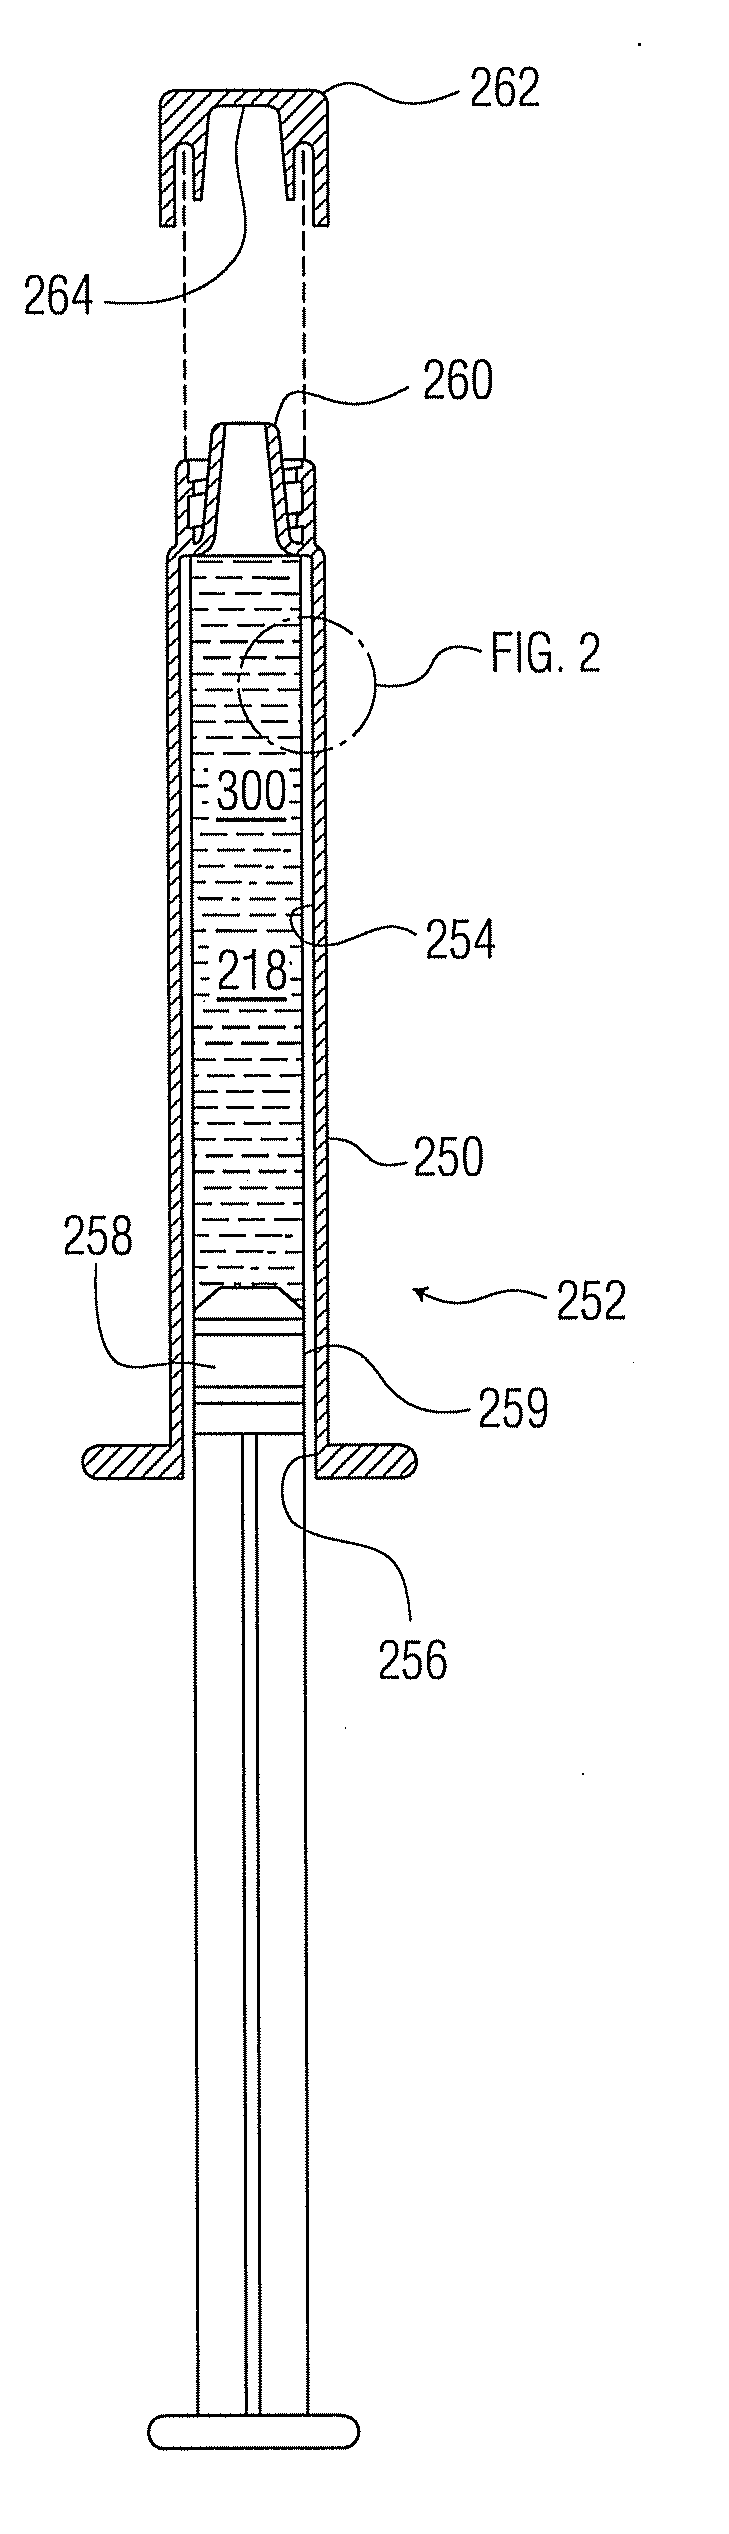 Plasma or CVD pre-treatment for lubricated pharmaceutical package, coating process and apparatus